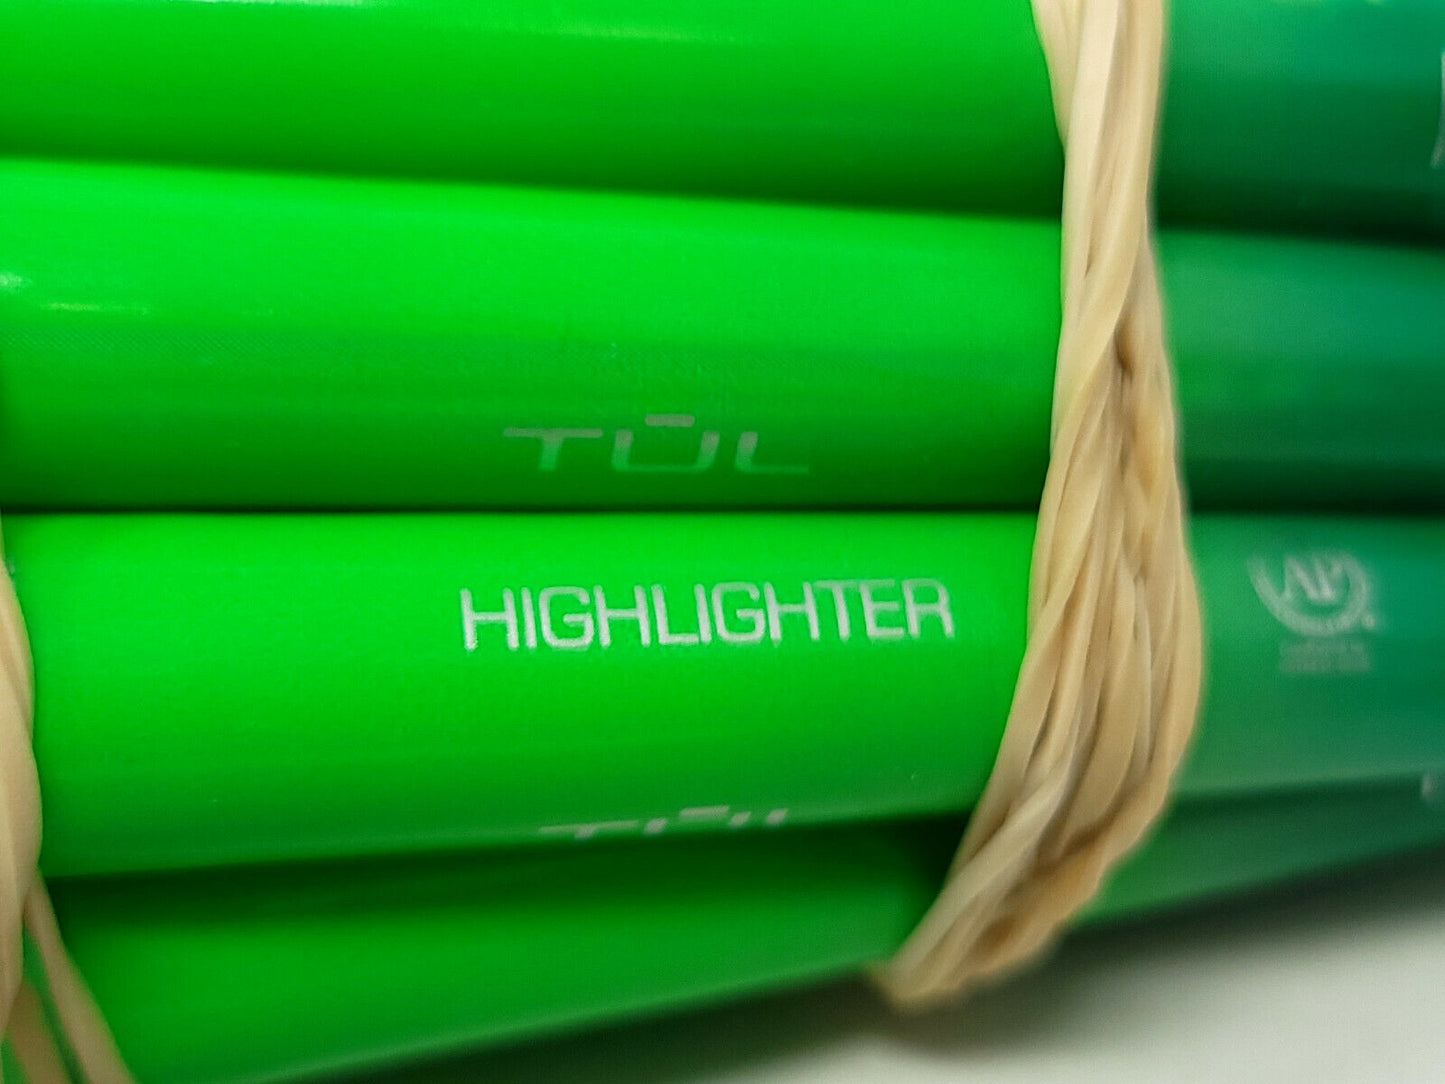 Lot of 12x TUL Pen Style Highlighters, Chisel Point, Green - NEW